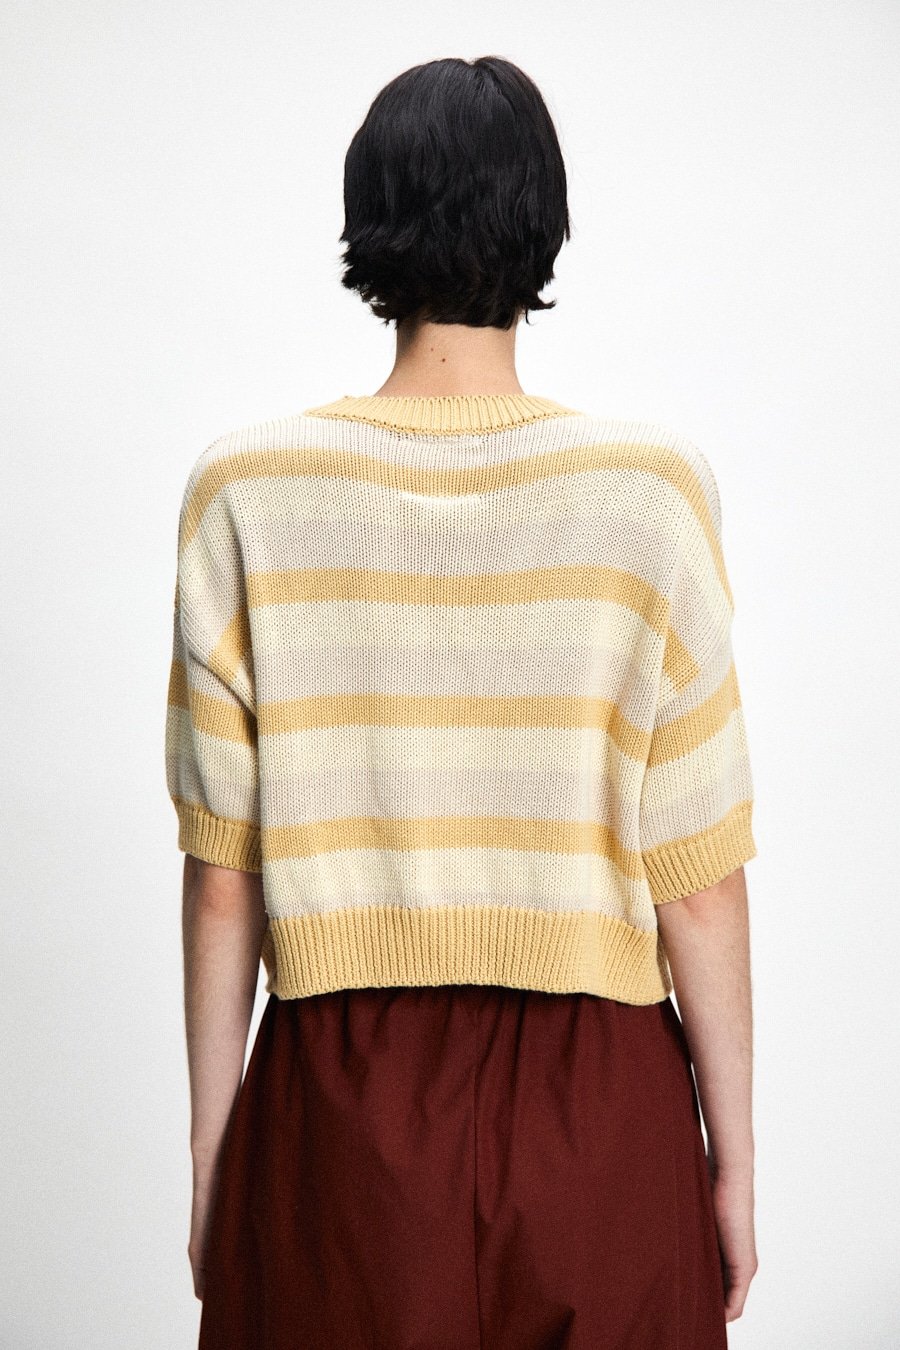 rita row pattie knit crop sweater / Wide cropped top in soft cotton jersey. Short-sleeved model with a trim round neckline and ribbed cuffs and hem. Ethically made with 100% ecotec cotton in Portugal.